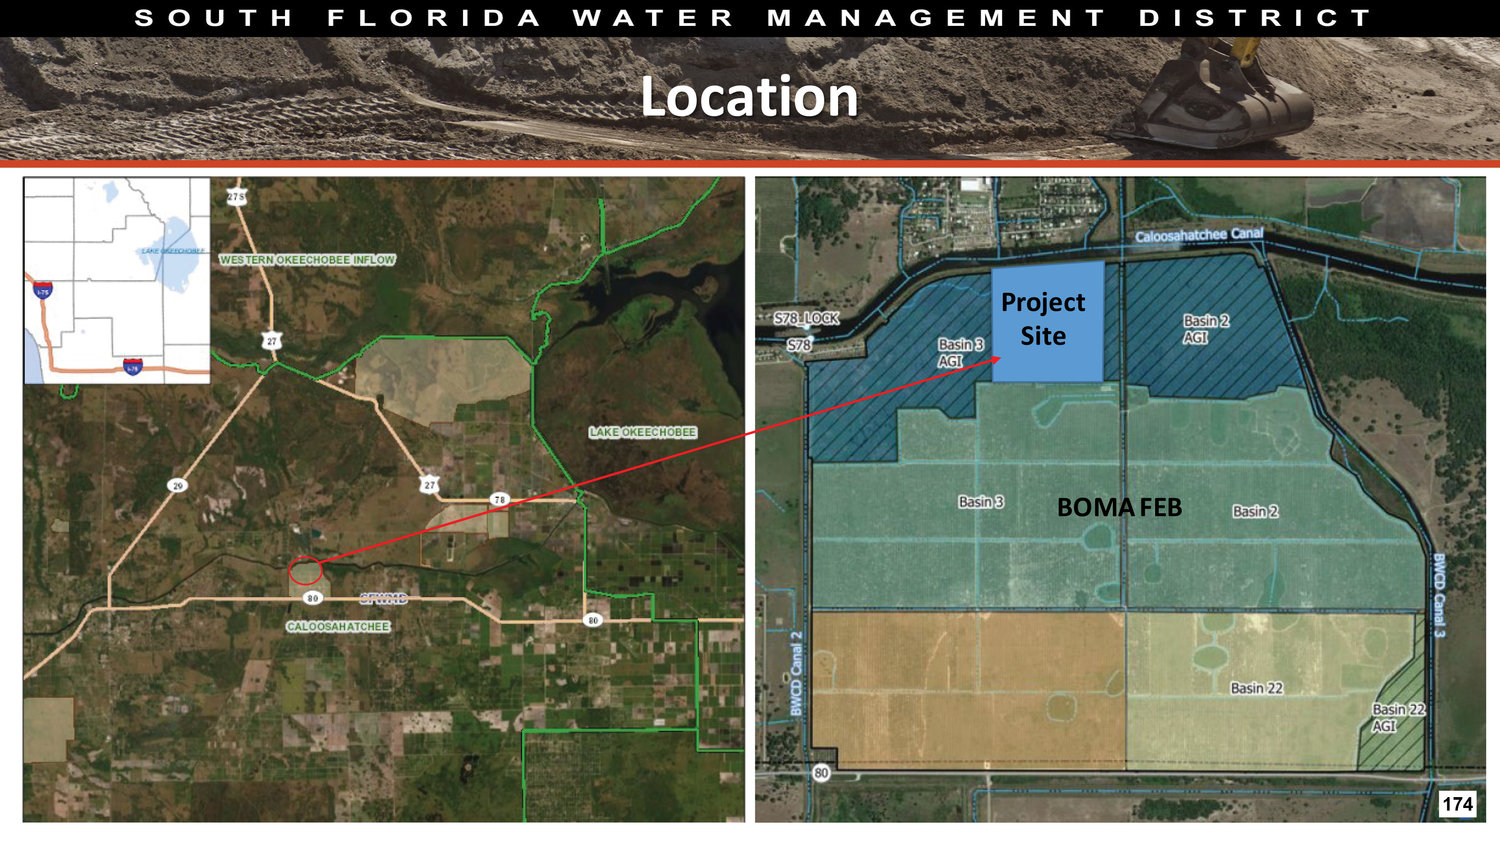 GLADES COUNTY -- A $24.6 million water quality treatment and testing project was approved at the Nov. 18 meeting of the South Florida Water Management District Governing Board.